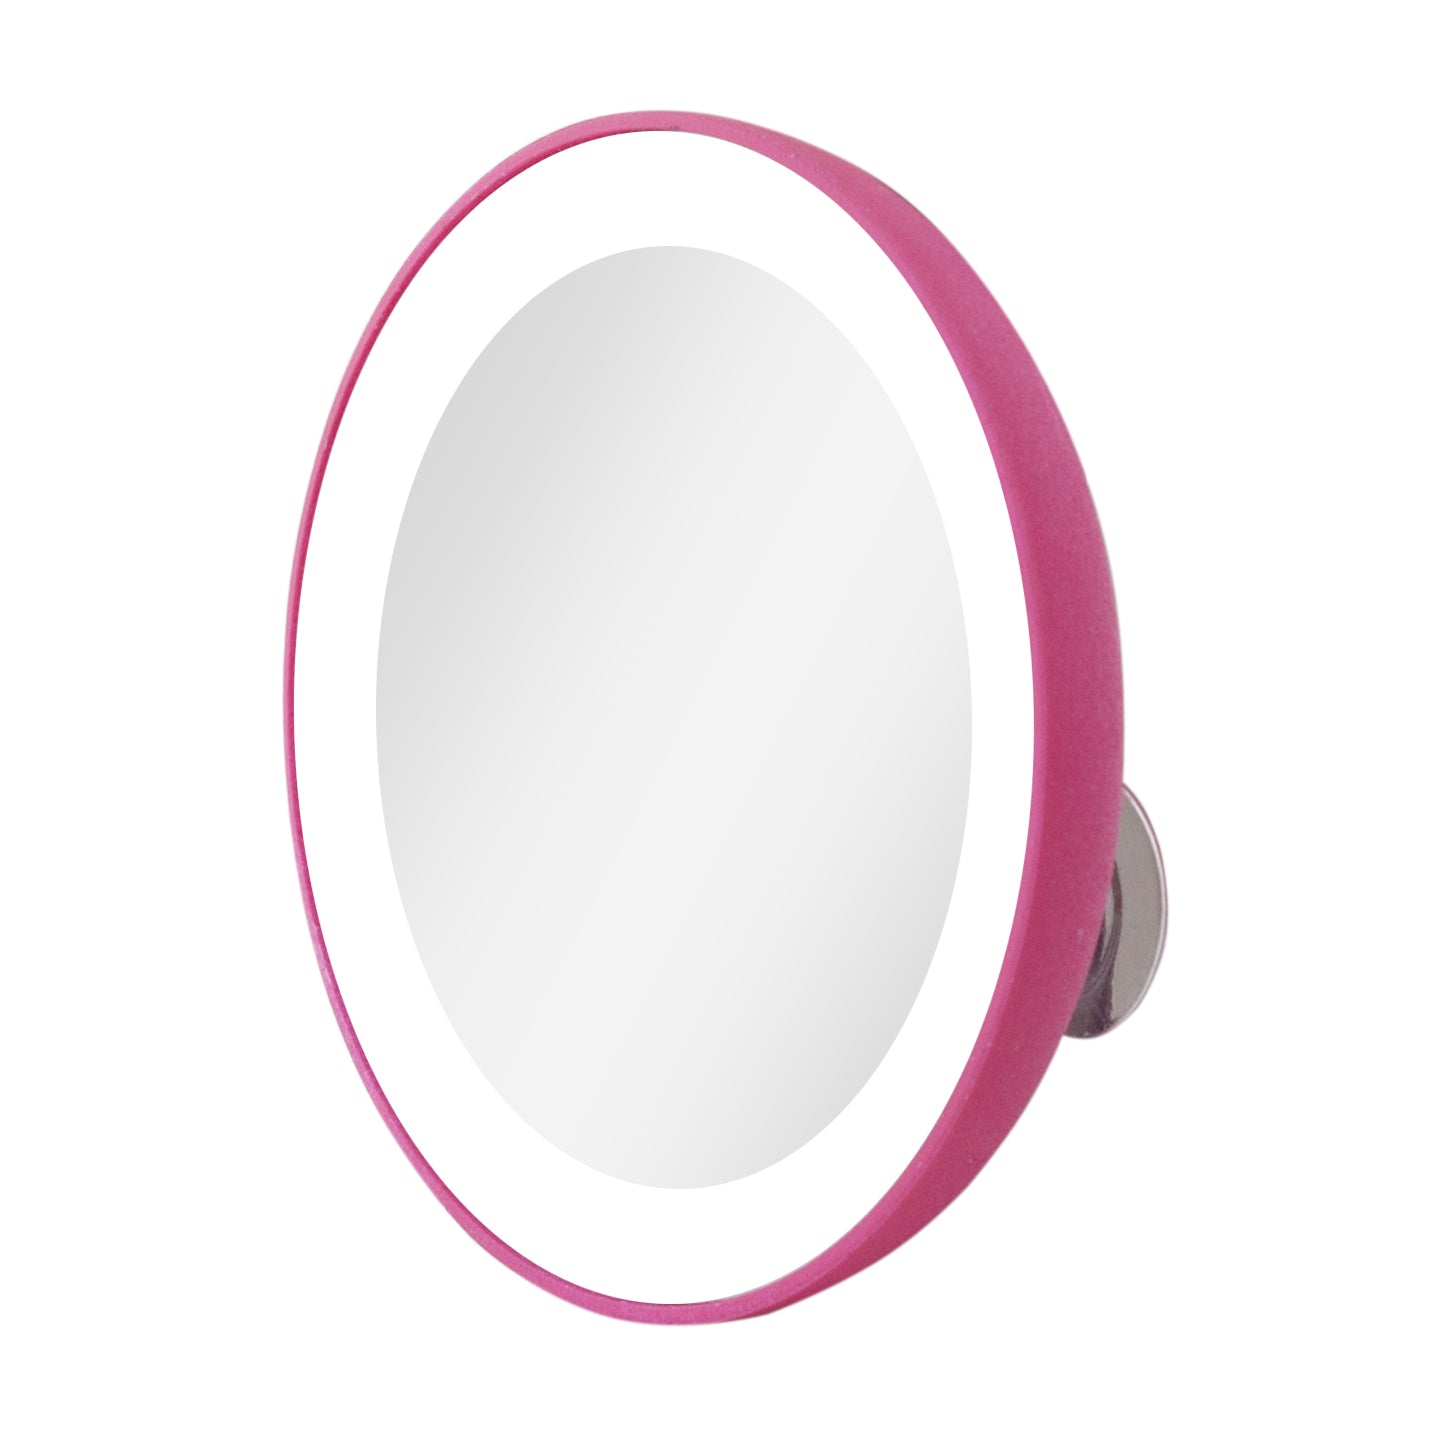 Lighted Compact Mirror with Magnification & Suction Cup